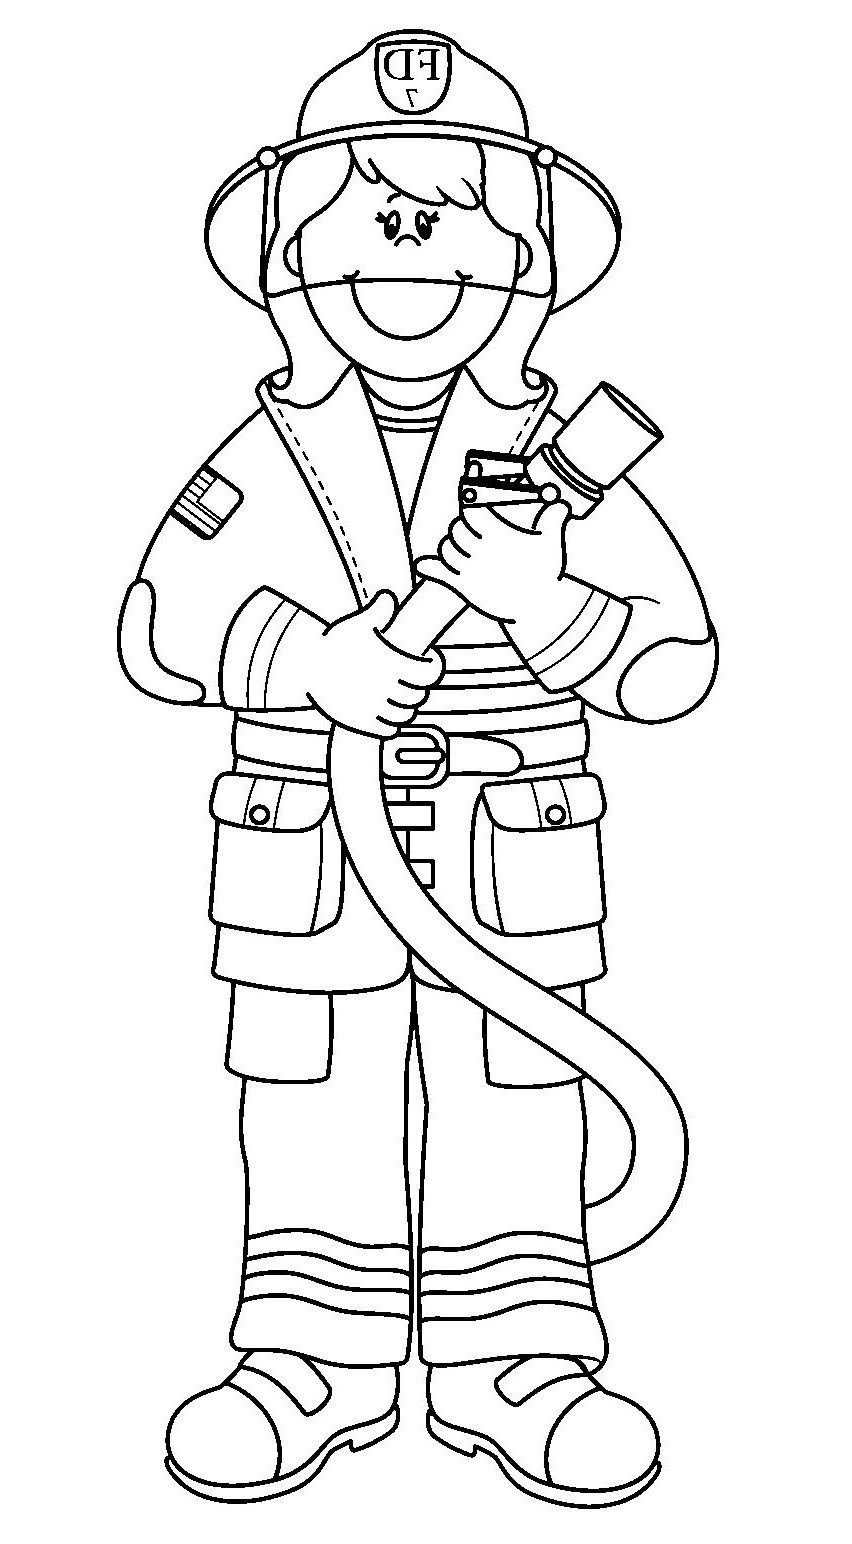 Amazing image of fireman coloring pages